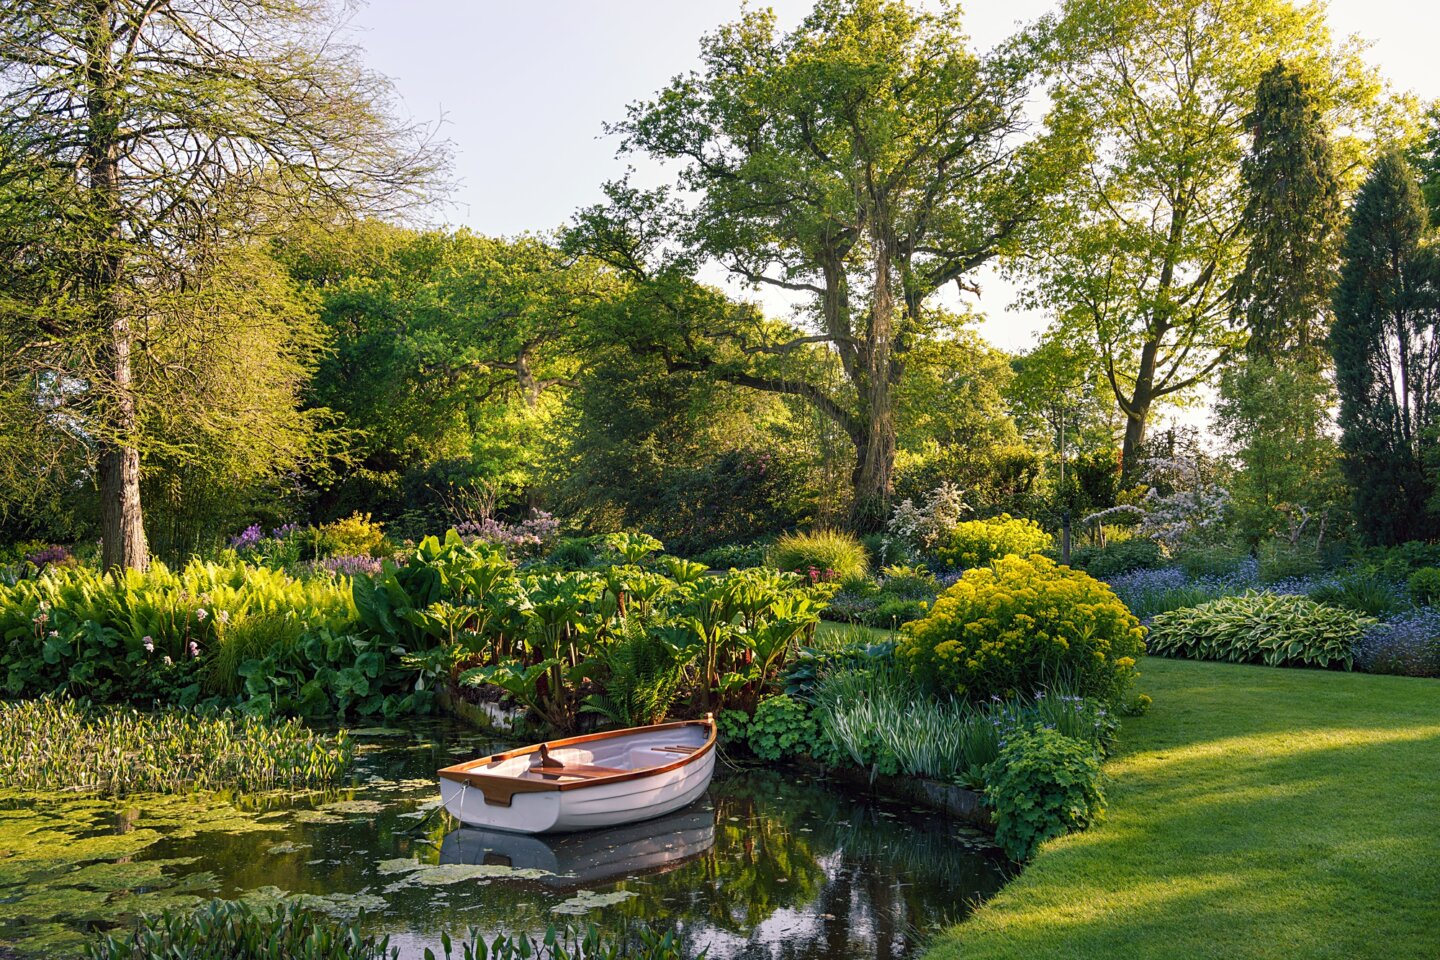 Ornamental boat in May at the Water Gardens of Beth Chatto